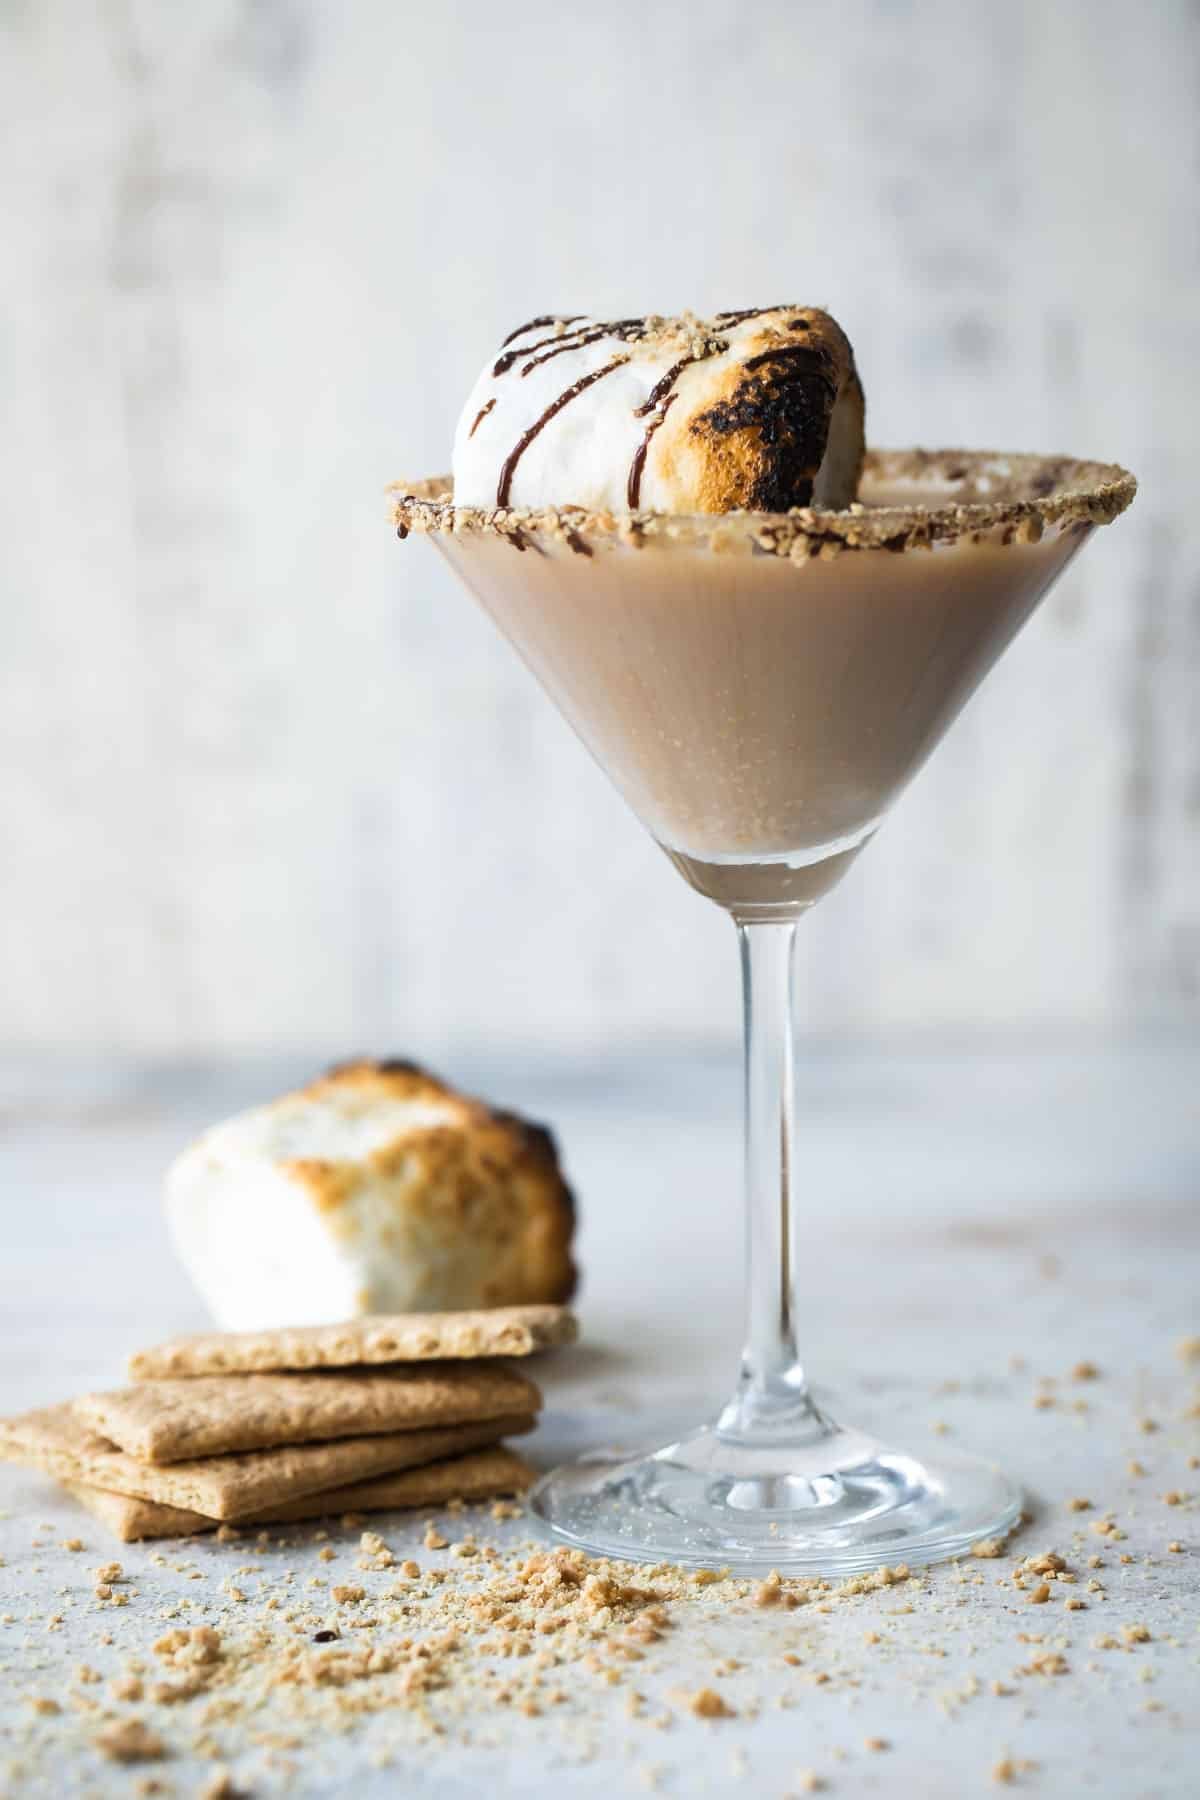 A S'mores Martini in a martini glass next to some graham crackers and a toasted marshmallow.